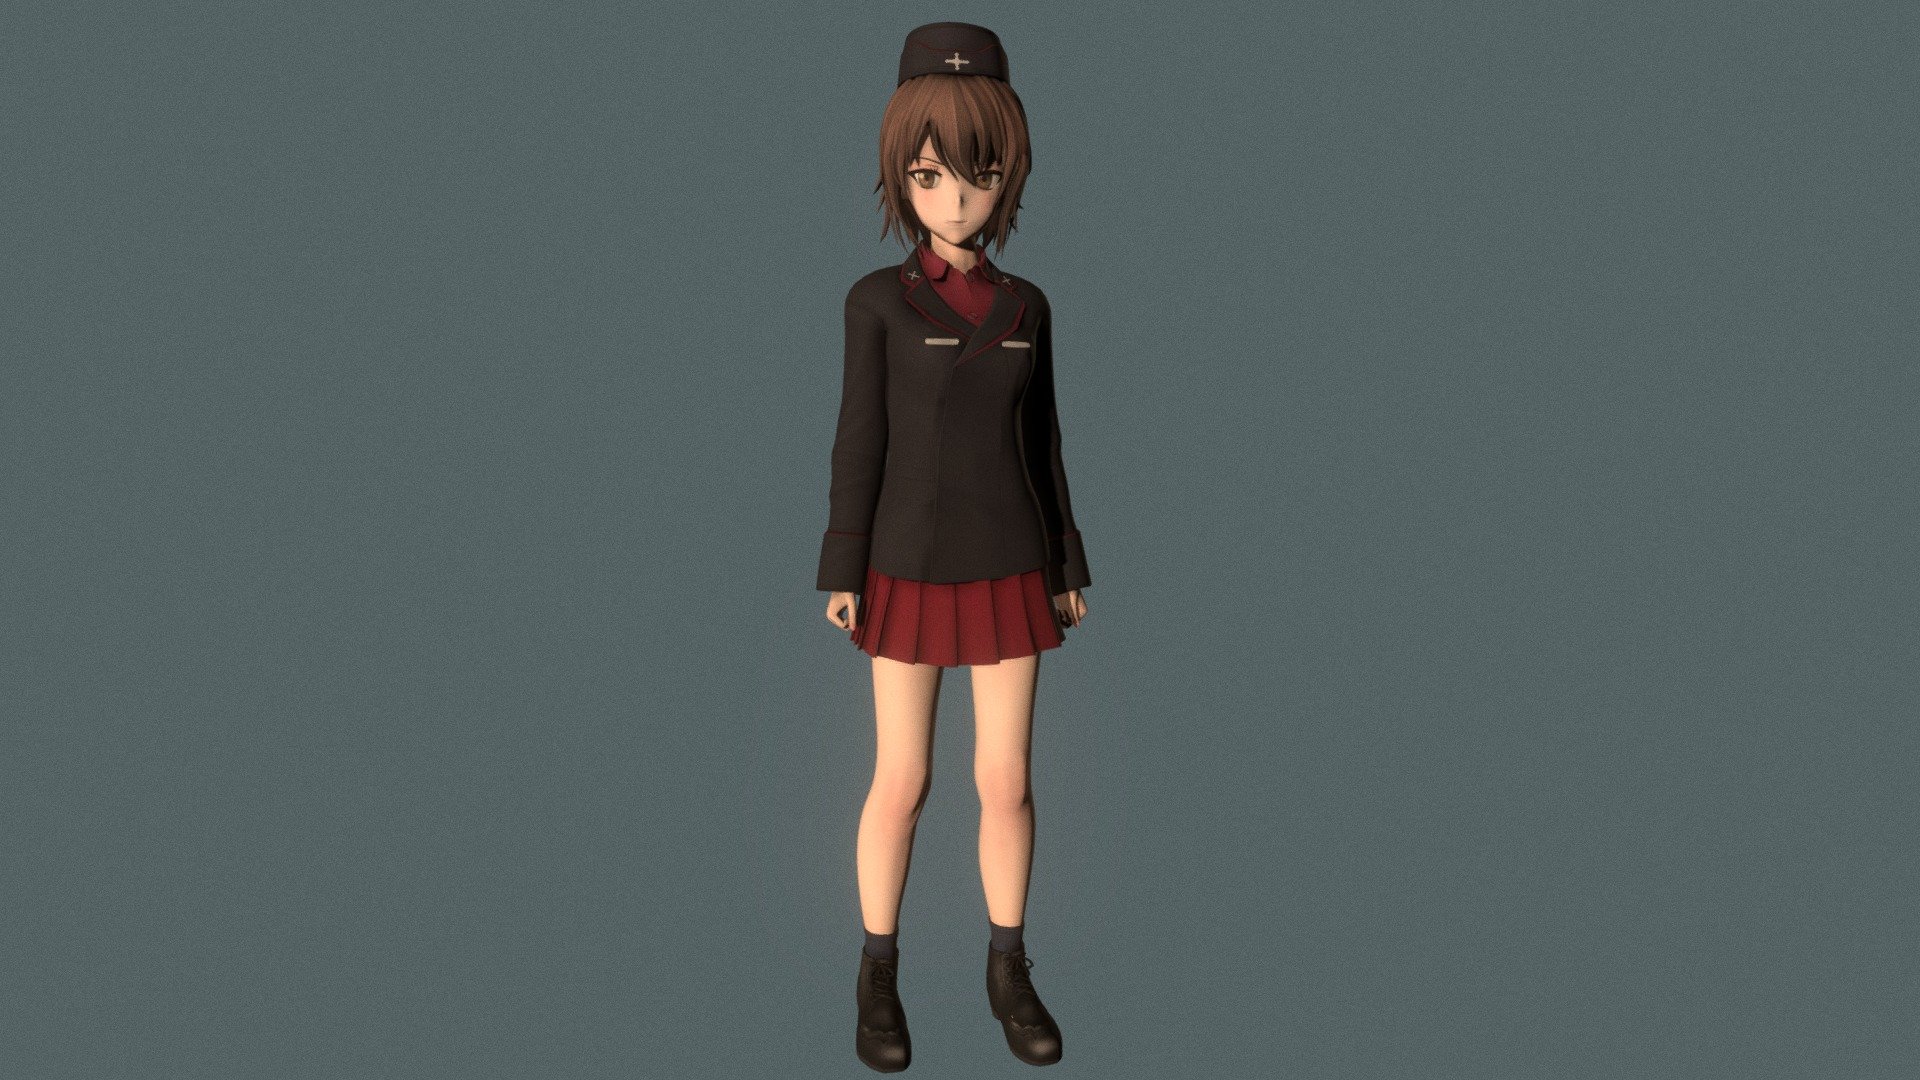 Posed model of anime girl Maho Nishizumi (Girls und Panzer).

This product include .FBX (ver. 7200) and .MAX (ver. 2010) files.

Rigged version: https://sketchfab.com/3d-models/t-pose-rigged-model-of-maho-nishizumi-dabb9b85dcfa4bb996182ea452fffac0

I support convert this 3D model to various file formats: 3DS; AI; ASE; DAE; DWF; DWG; DXF; FLT; HTR; IGS; M3G; MQO; OBJ; SAT; STL; W3D; WRL; X.

You can buy all of my models in one pack to save cost: https://sketchfab.com/3d-models/all-of-my-anime-girls-c5a56156994e4193b9e8fa21a3b8360b

And I can make commission models.

If you have any questions, please leave a comment or contact me via my email 3d.eden.project@gmail.com 3d model